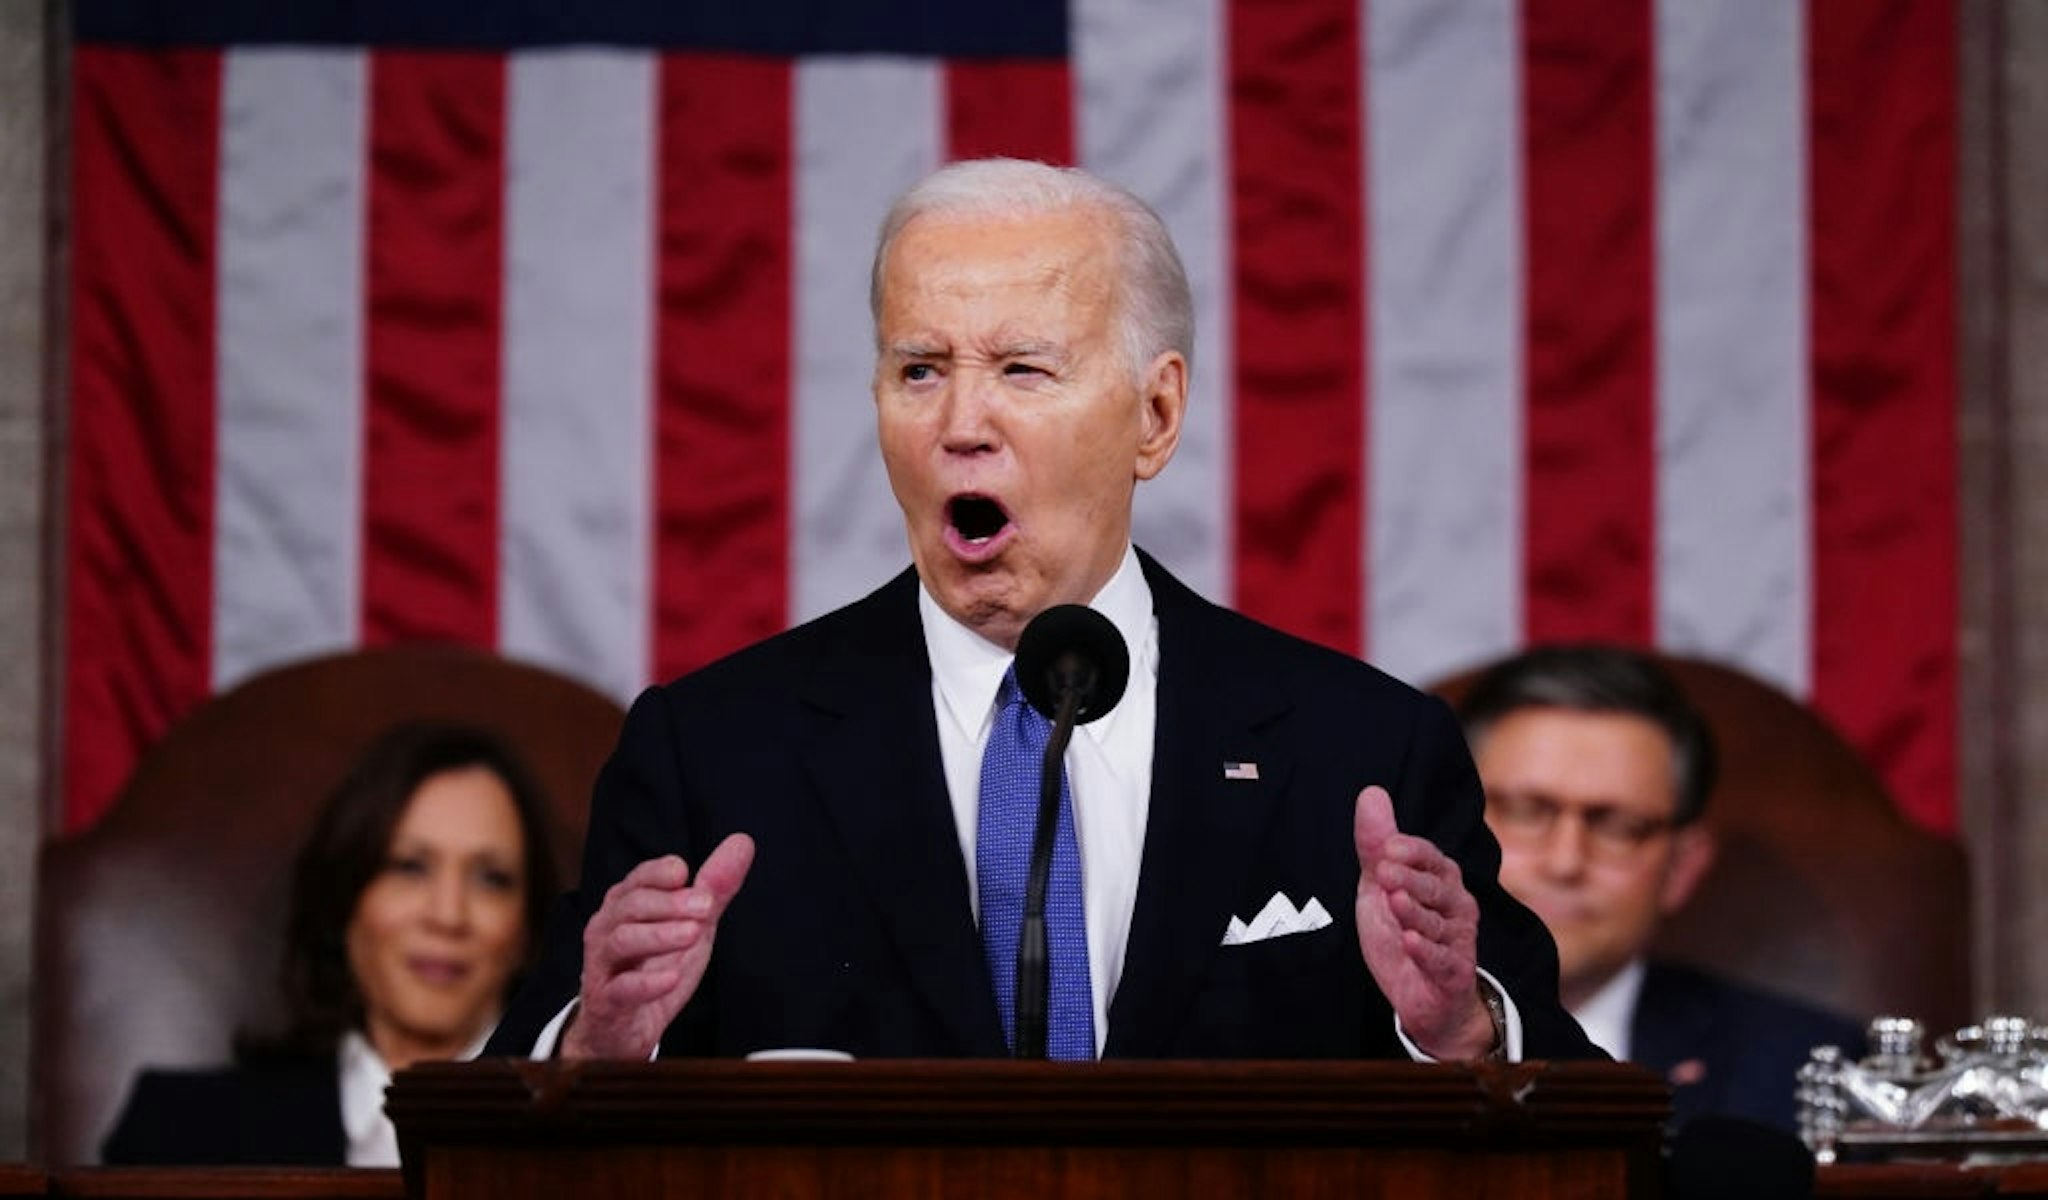 US President Joe Biden, during a State of the Union address at the US Capitol in Washington, DC, US, on Thursday, March 7, 2024. Election-year politics will increase the focus on Biden's remarks and lawmakers' reactions, as he's stumping to the nation just months before voters will decide control of the House, Senate, and White House. Photographer: Shawn Thew/EPA/Bloomberg